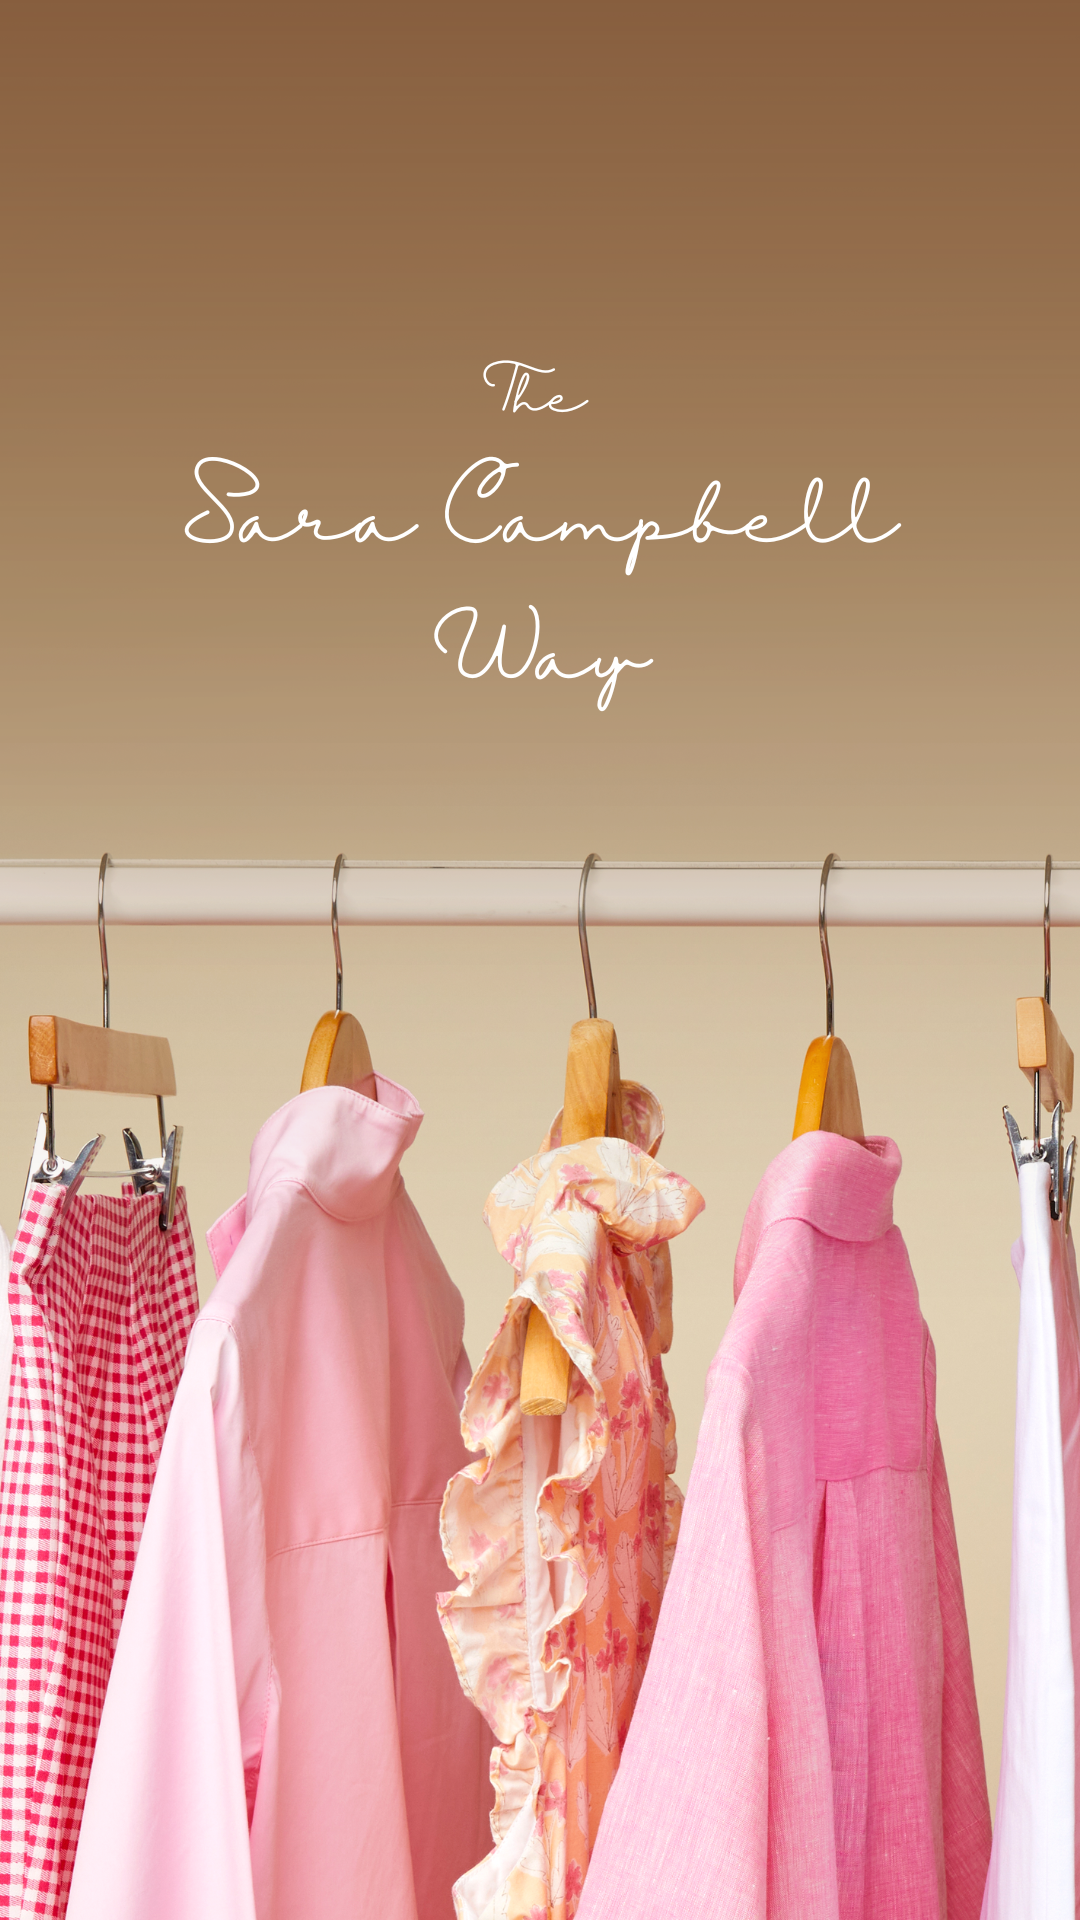 Photo of a clothing rack with "The Sara Campbell Way" Written above. 